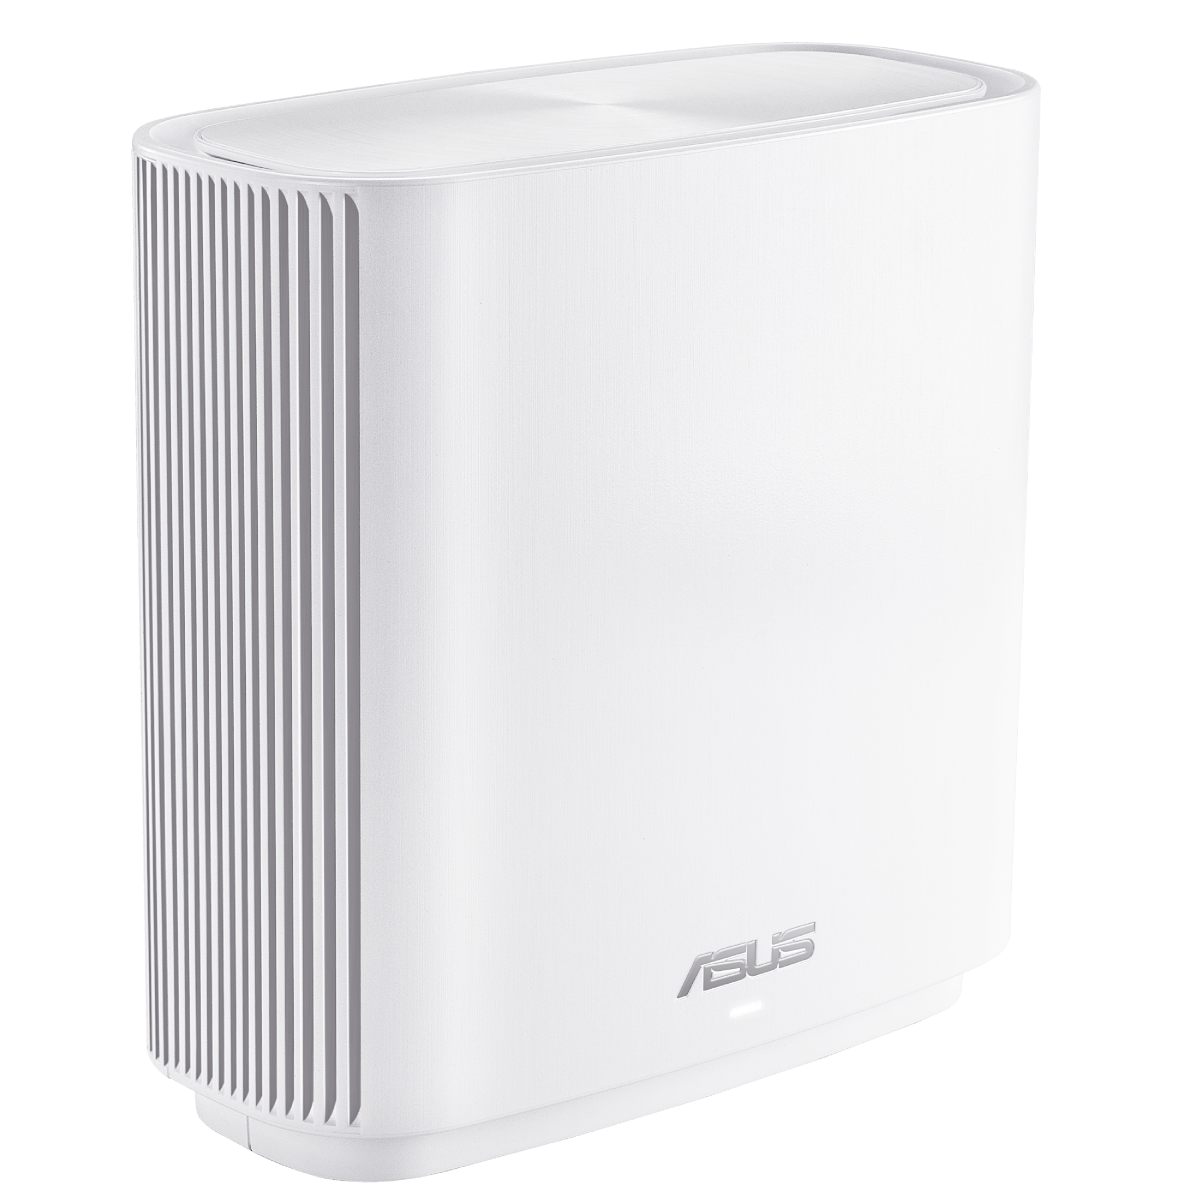  - ASUS ZenWifi AC (CT8) AC3000 WiFi 5 Mesh System, Pack of 1 - White